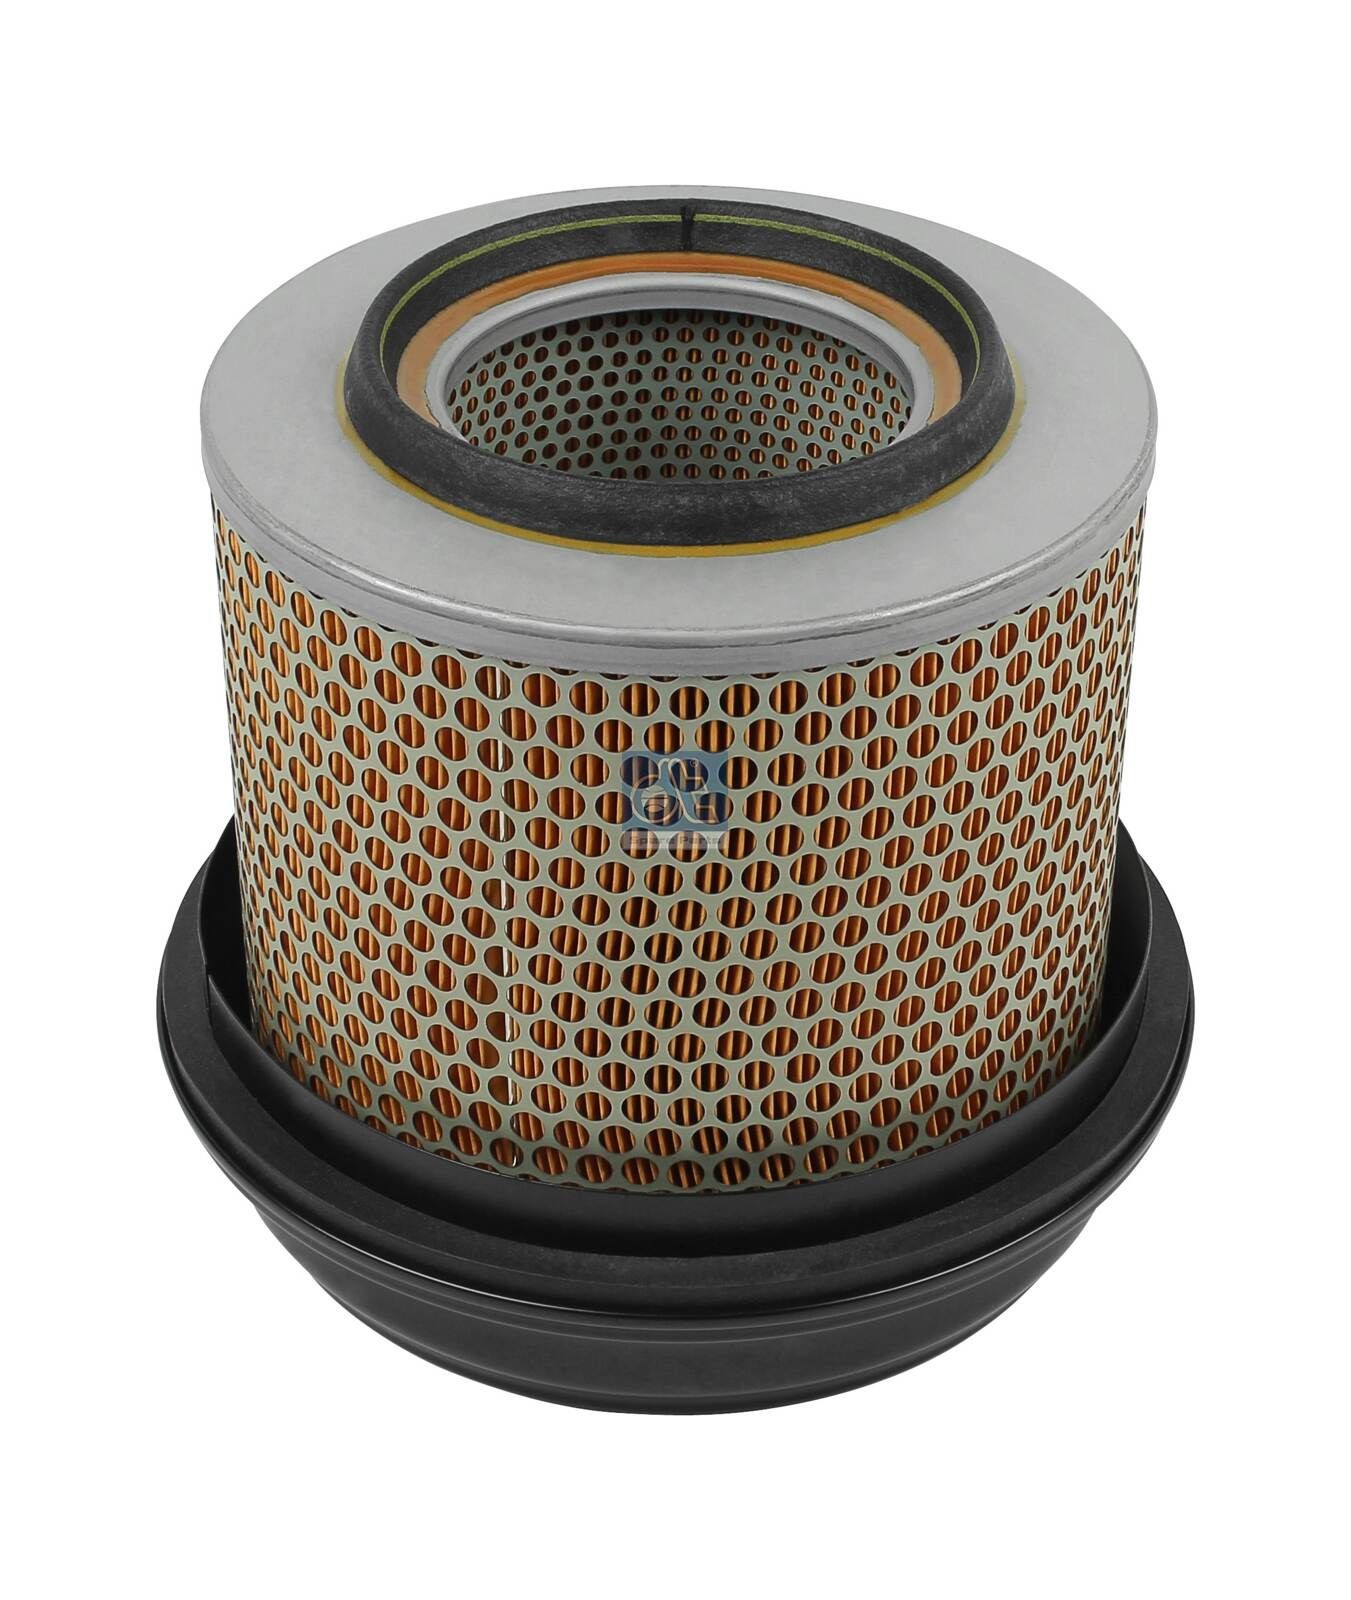 C 21 338 DT Spare Parts 221mm, 252mm, Filter Insert Height: 221mm Engine air filter 4.65859 buy